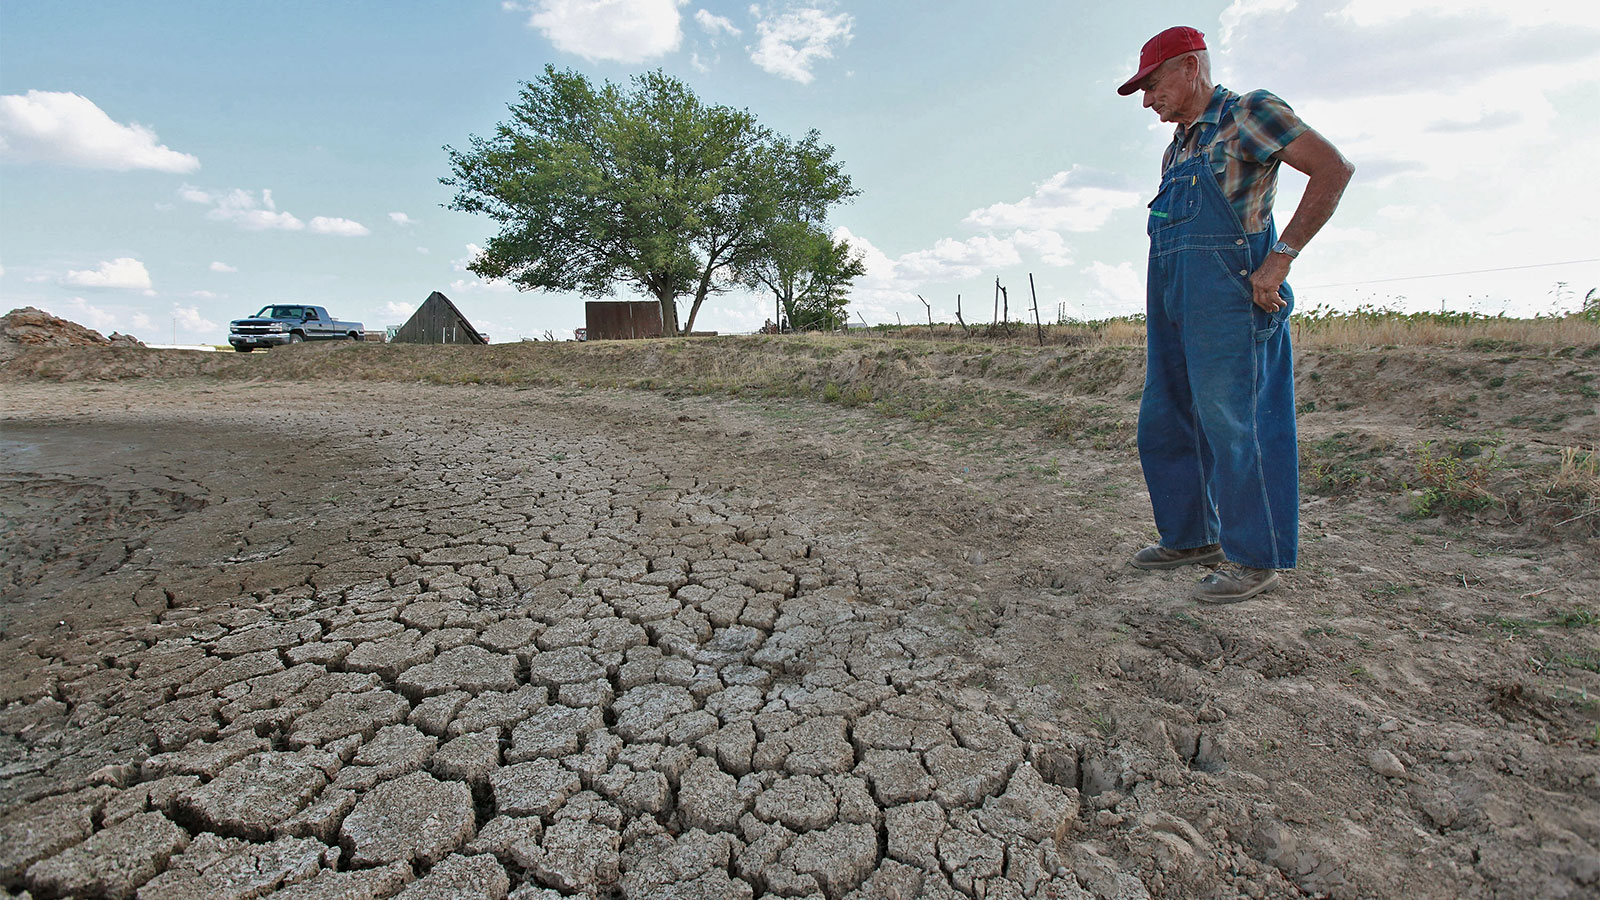 A male farmer wearing overalls and a red cap looking down at dry, cracked earth caused by severe drought